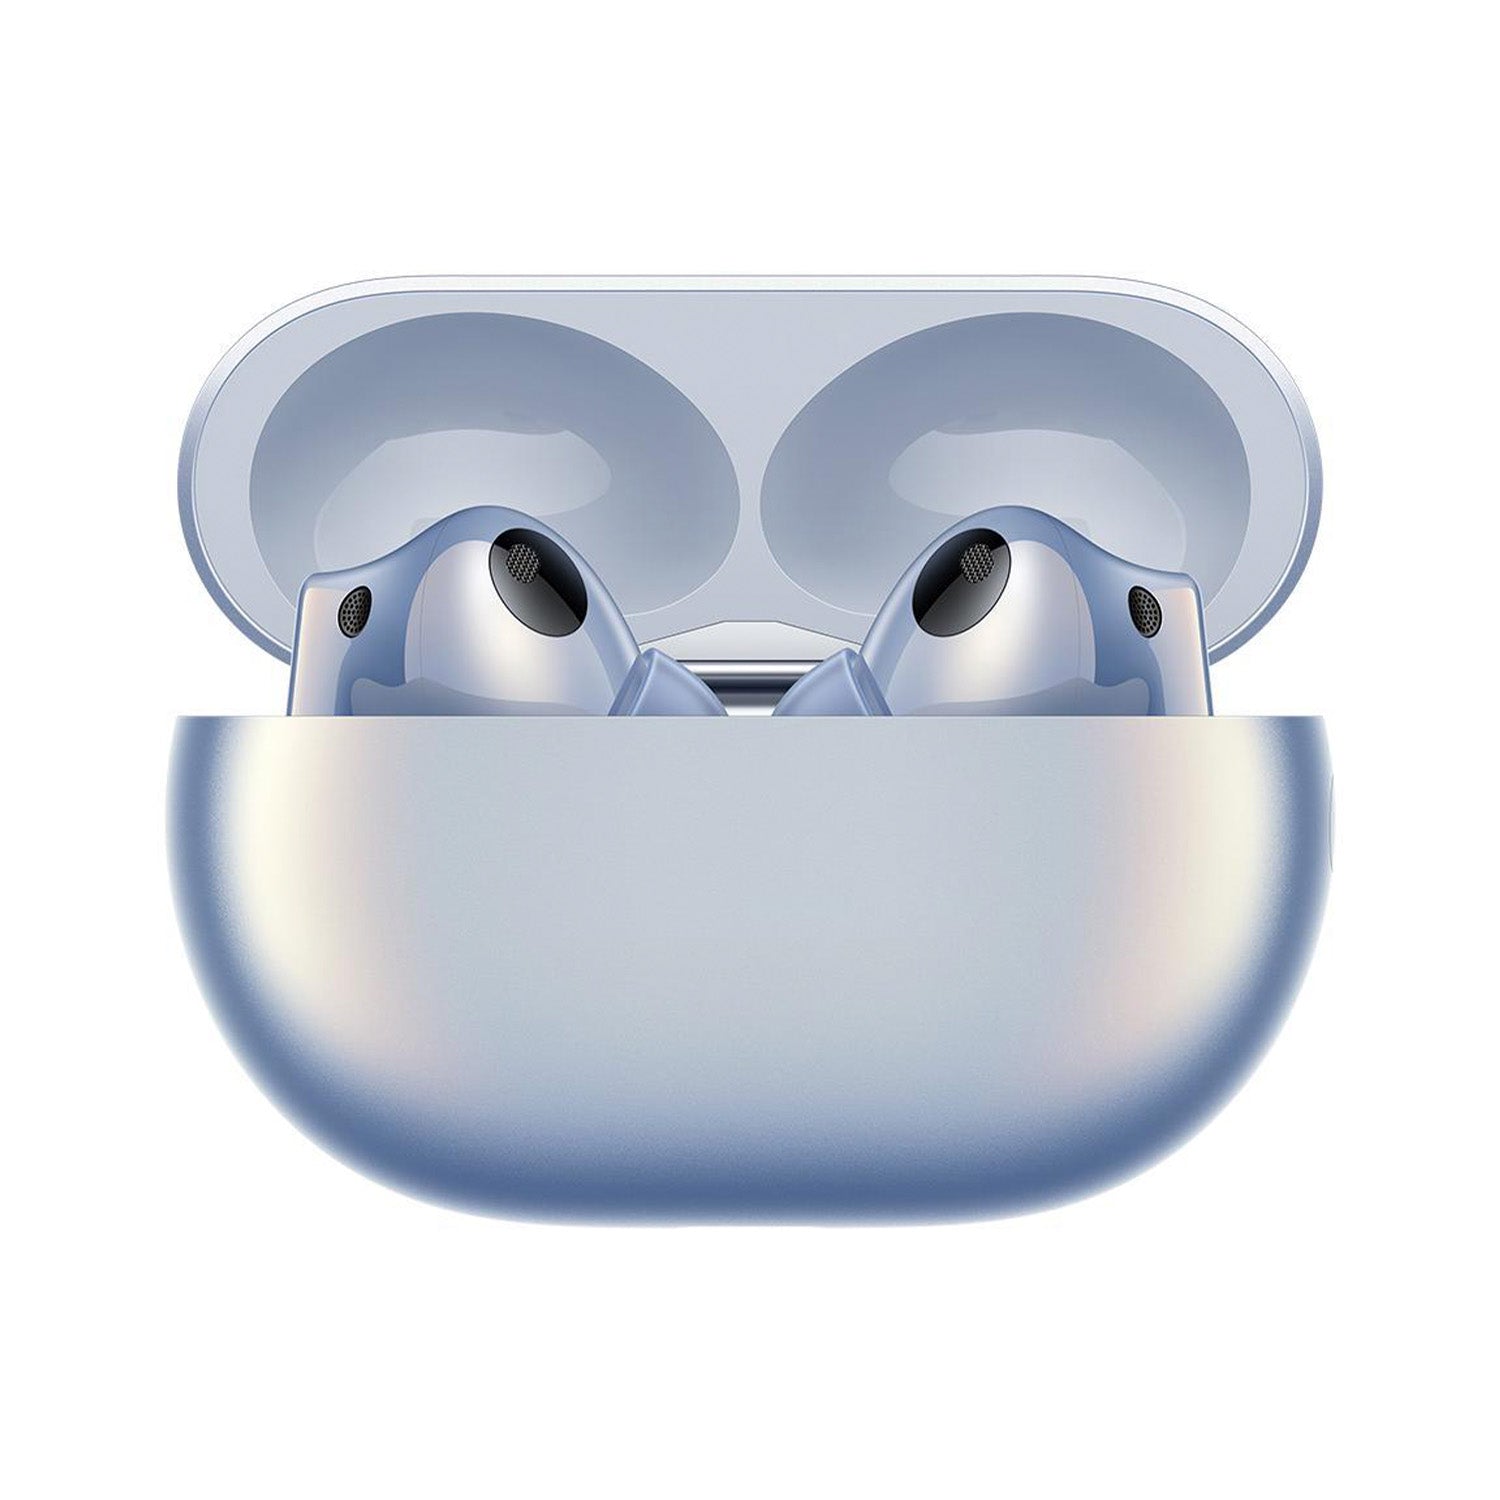 HUAWEI Freebuds Pro 2 Wireless Earbuds - Active noise cancellation, Dual-Speaker, 11 mm  dynamic driver,  Bluetooth 5.2, Water Resistant in-Ear Headphones - Silver Blue (55035976)